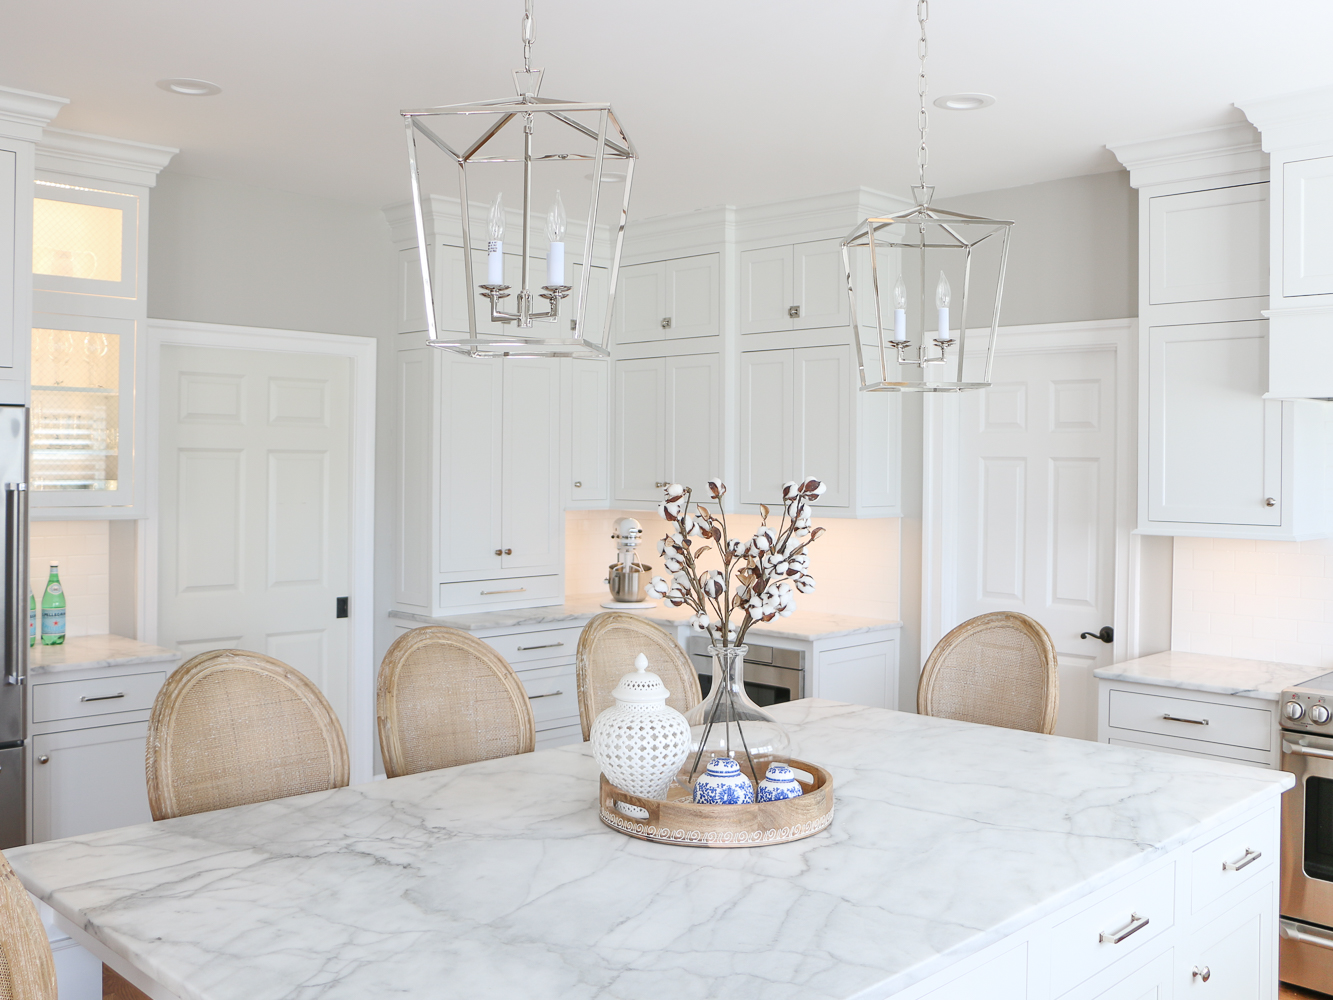 All white kitchen remodel with inset cabinets, carrara marble island, polished nickel pendants, cane back counter stools